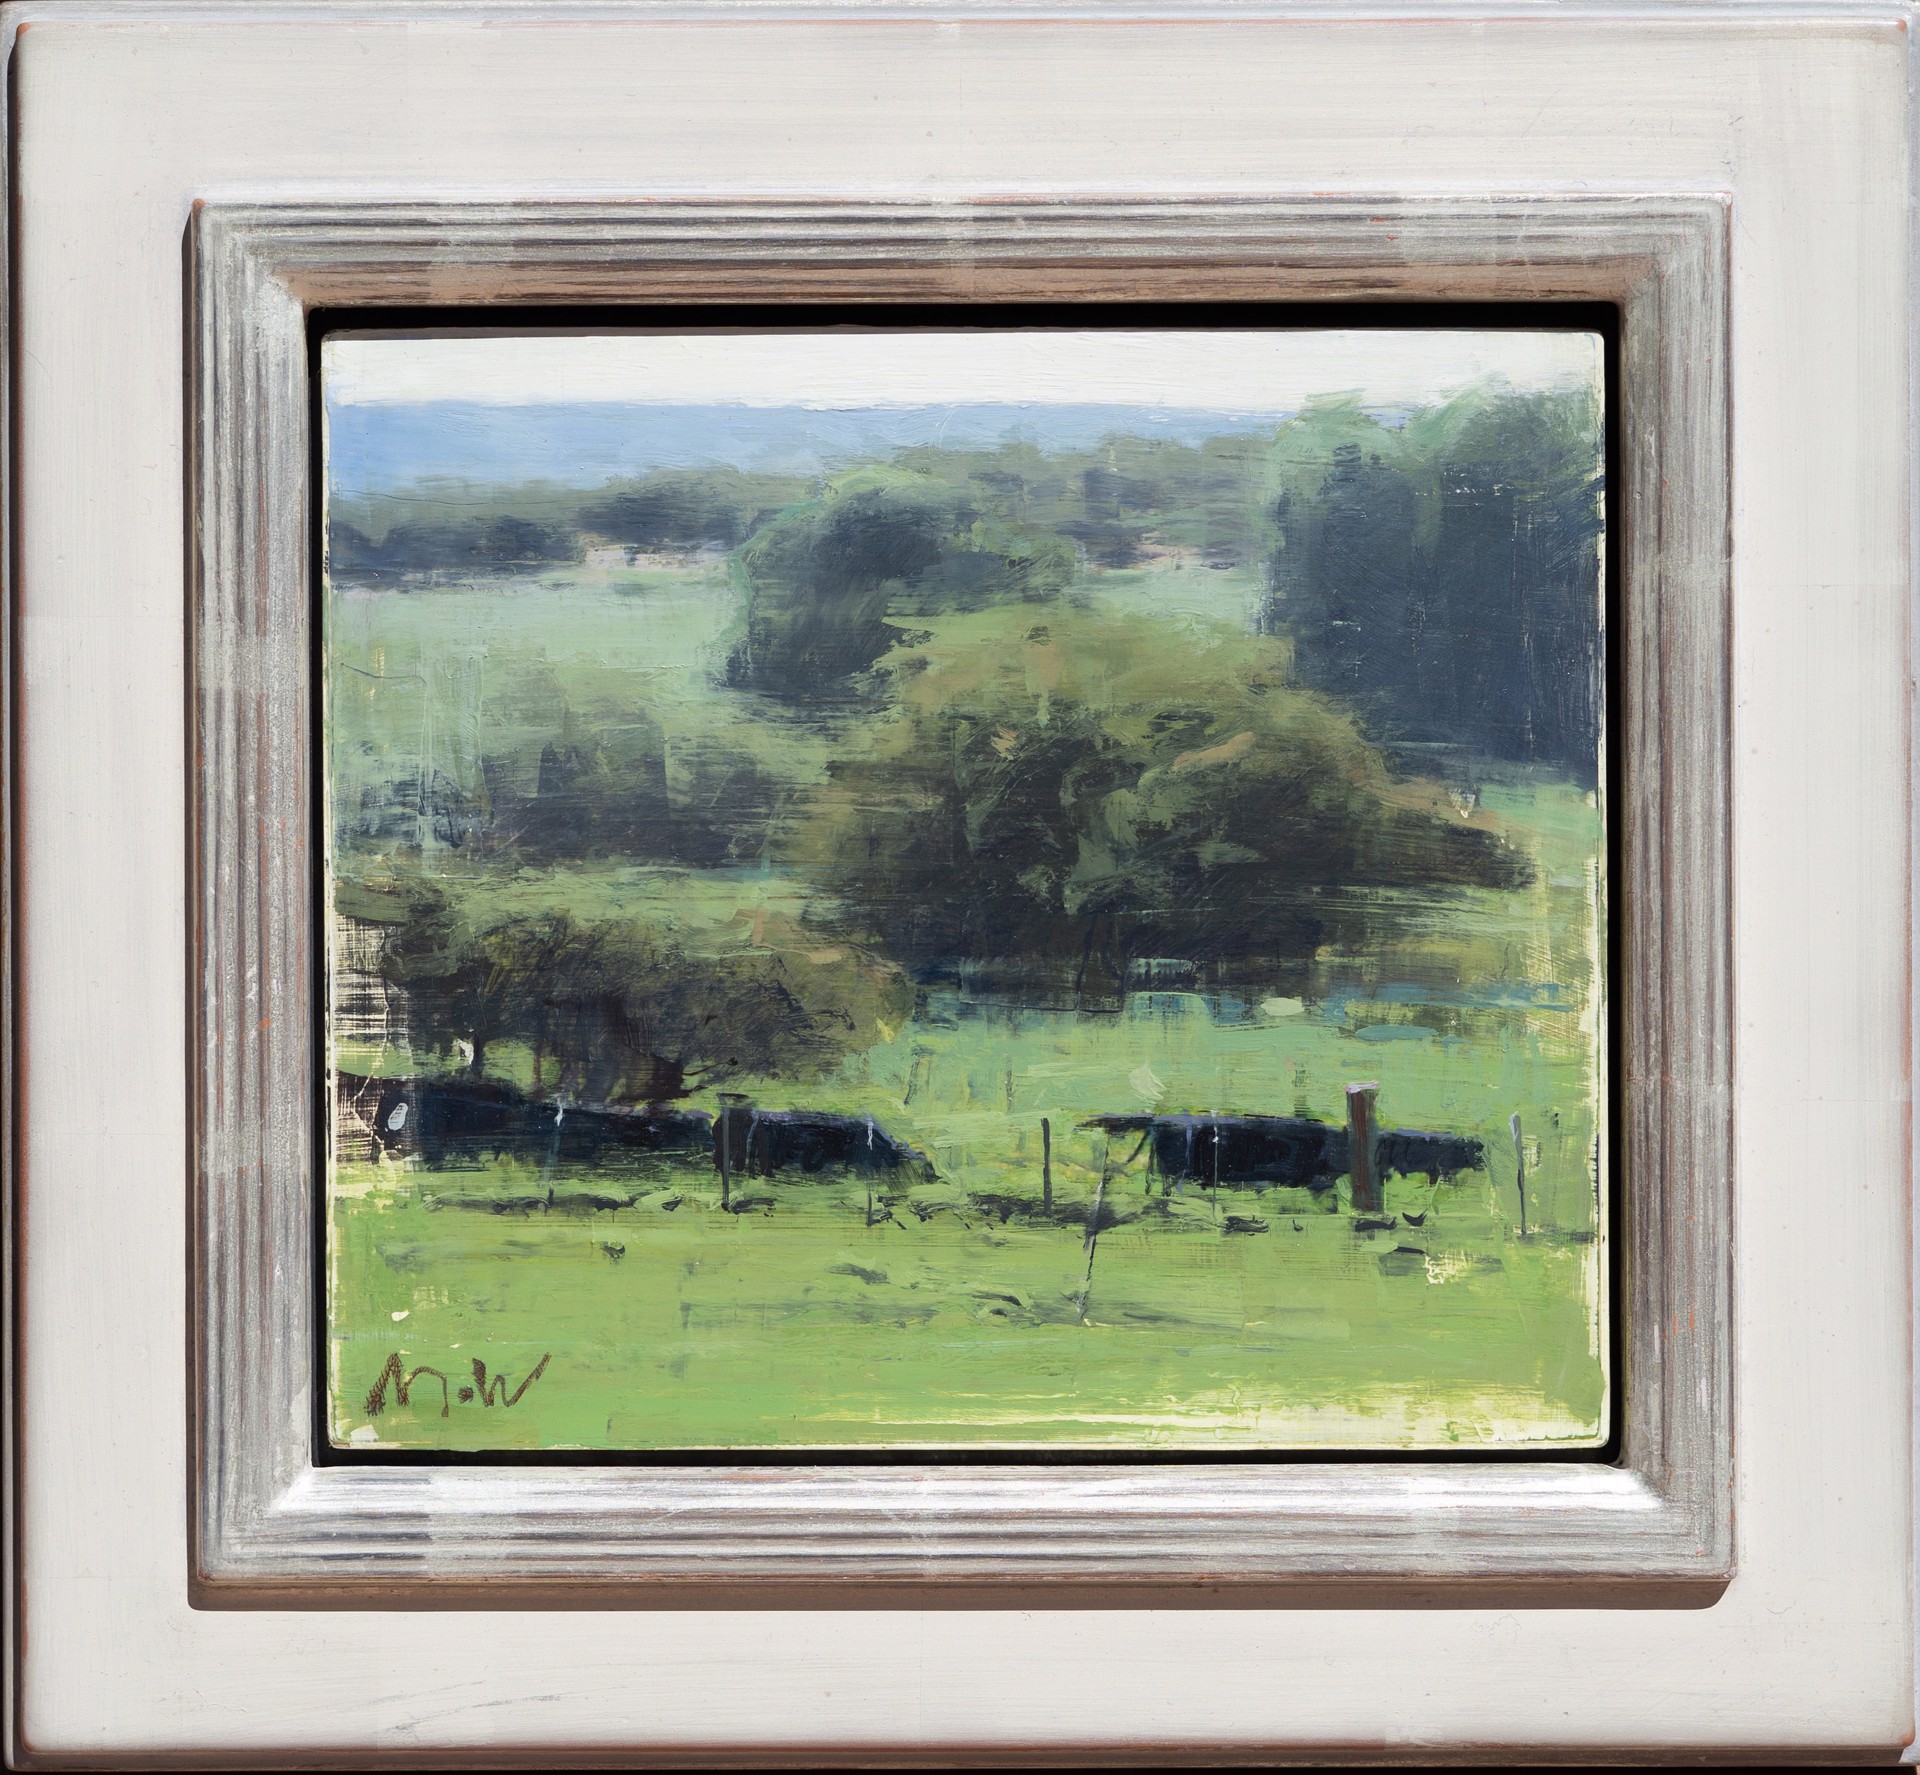 Small Green Landscape with Black Cows #2 by Michael Workman